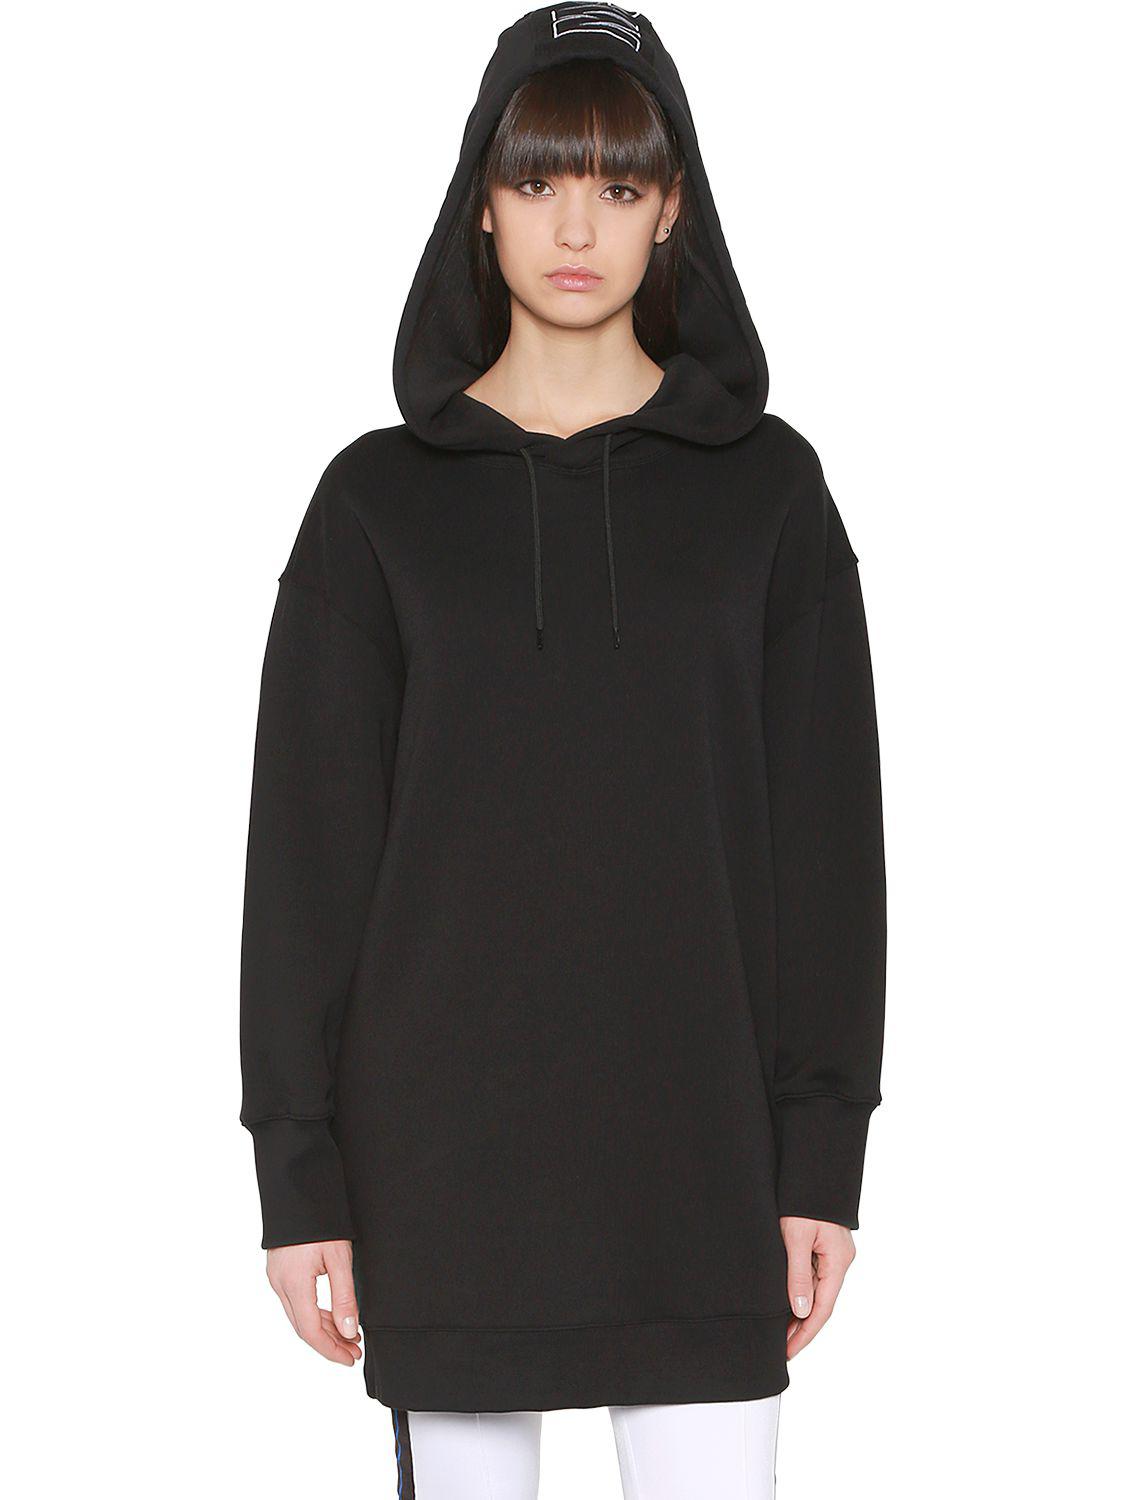 Lyst - Msgm Oversized Embroidered Cotton Sweatshirt in Black